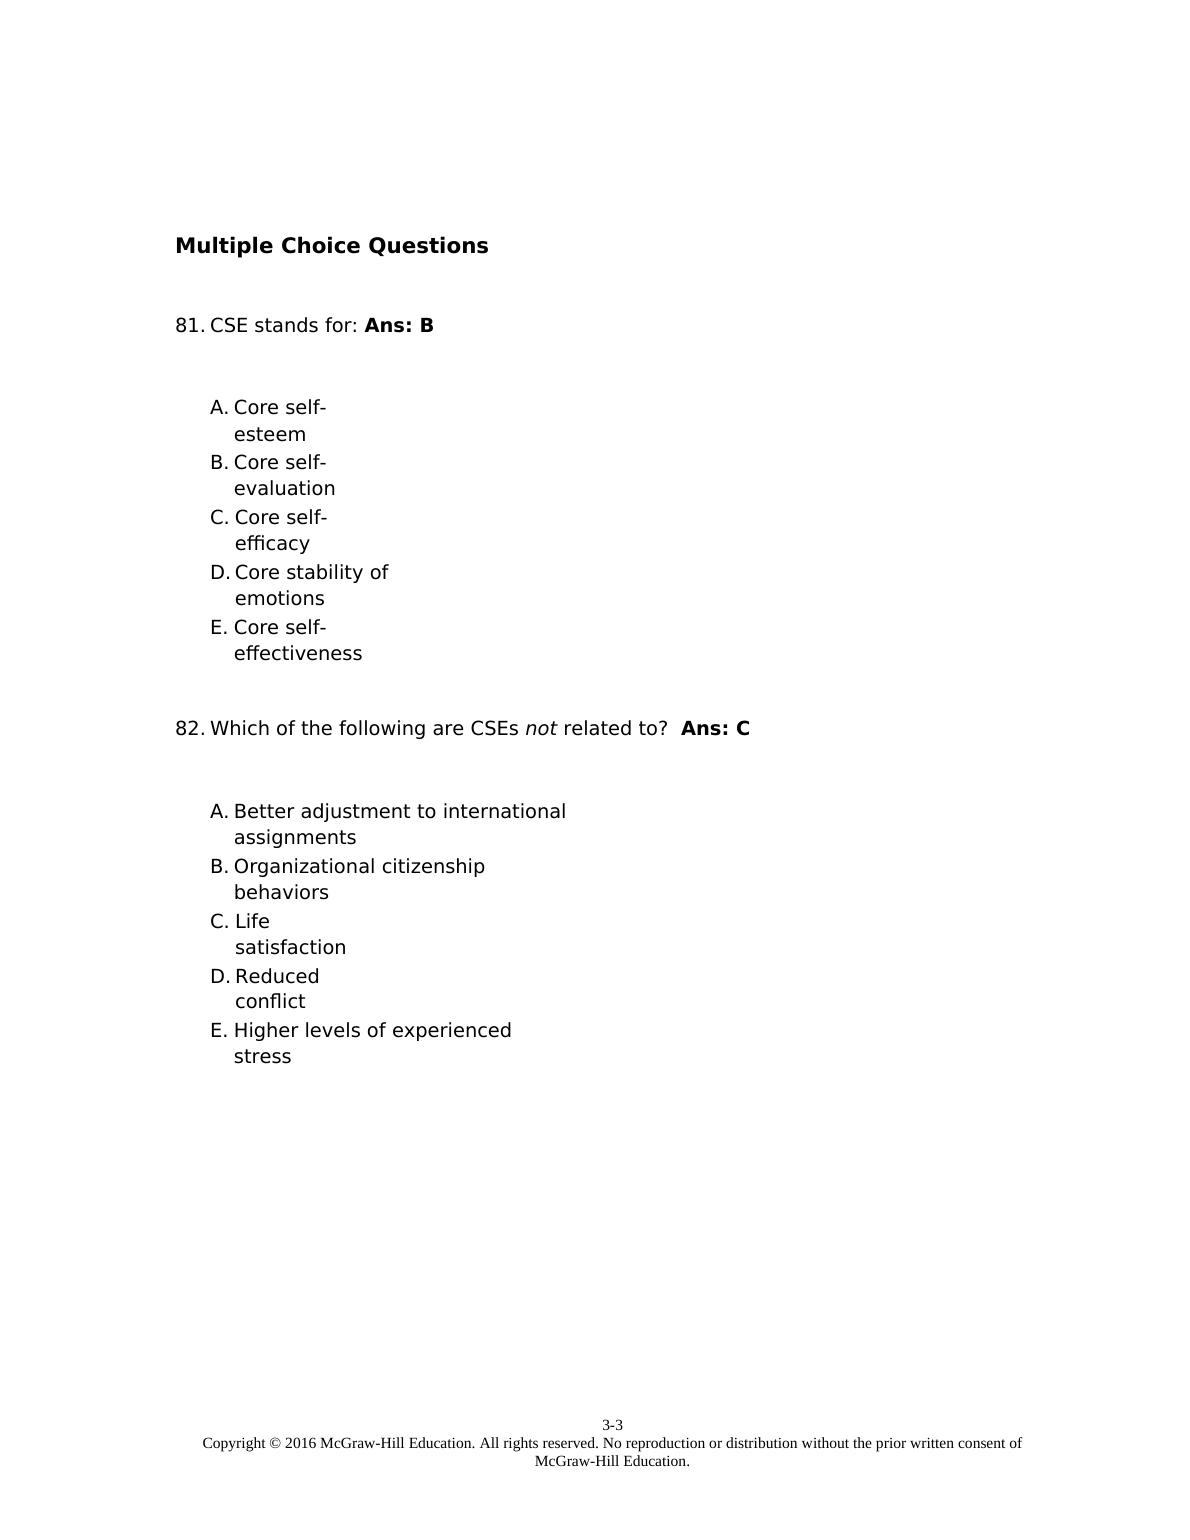 BUSS5069 - Individual Differences and Emotions - Question Answers_3